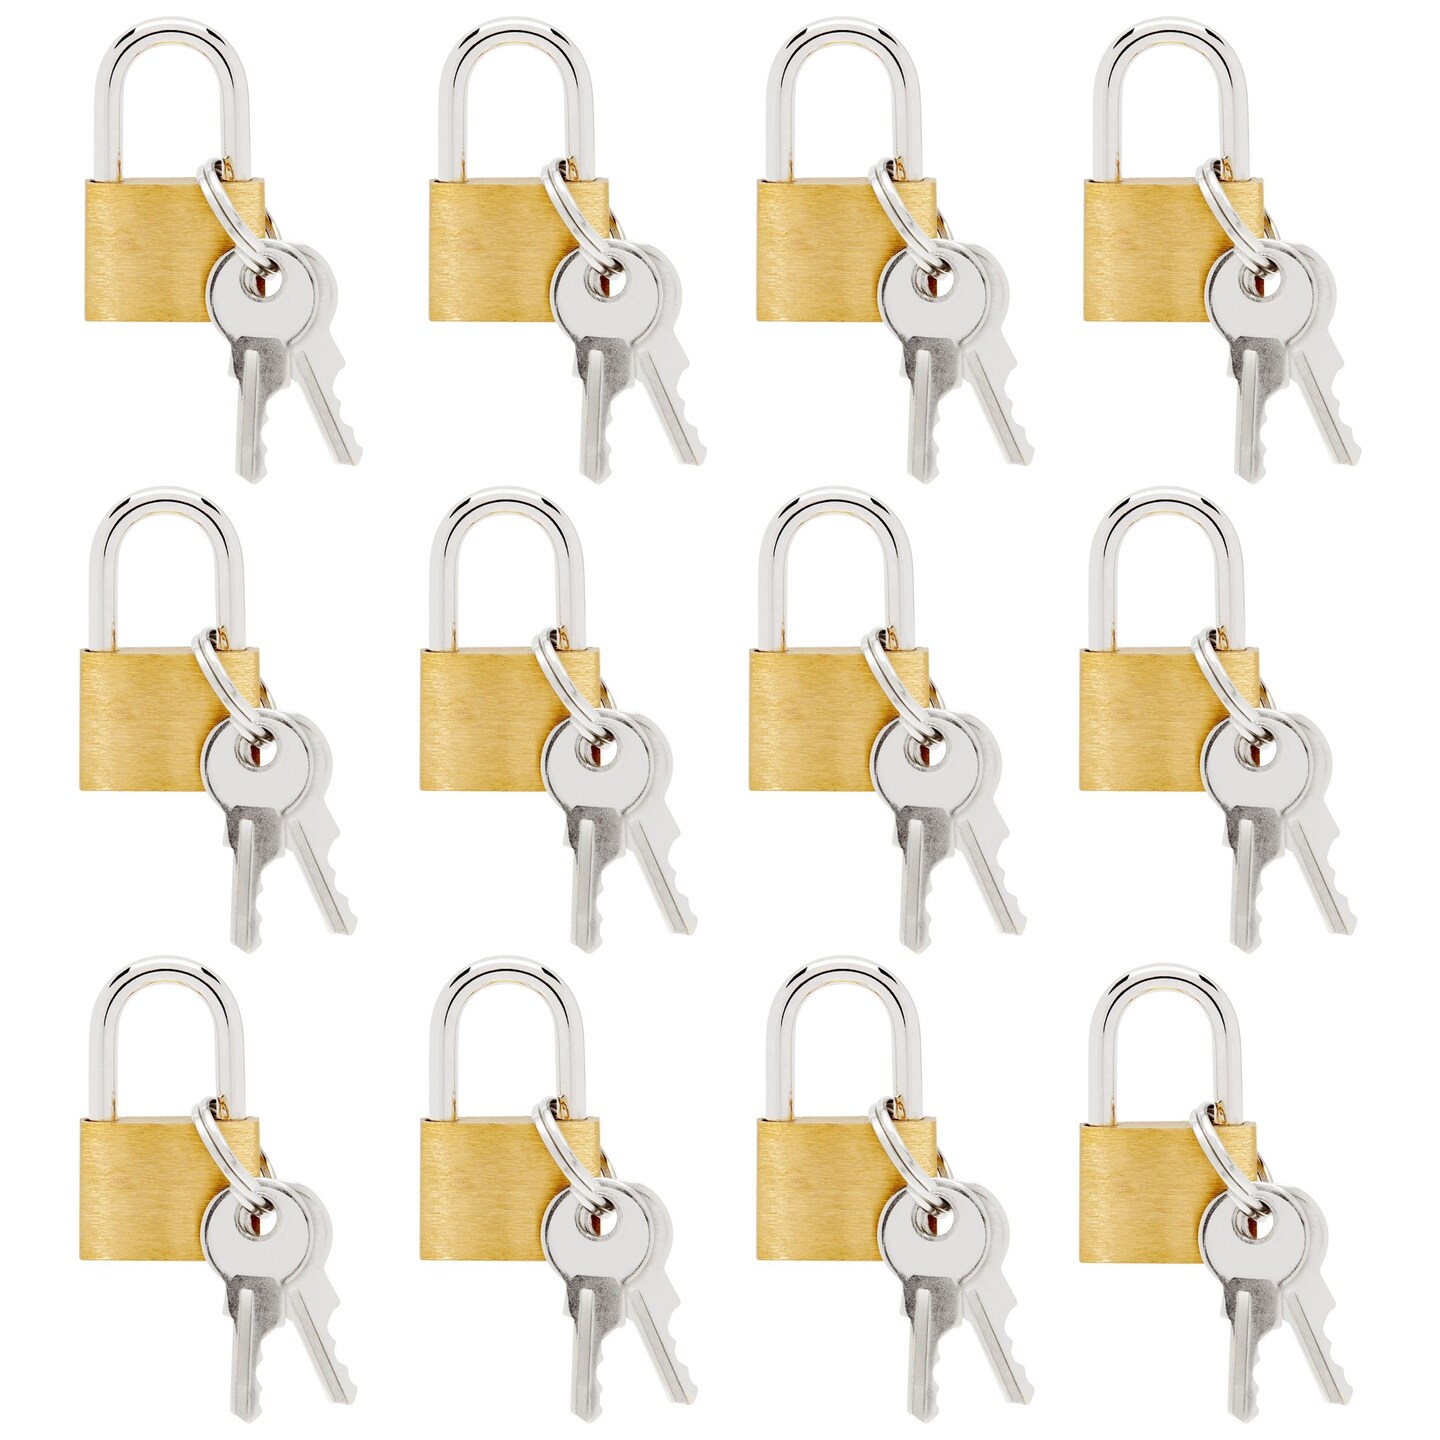 12 Pack 1.2-inch Small Luggage Locks with Keys - Mini Padlocks for Locker, Suitcase and Gym